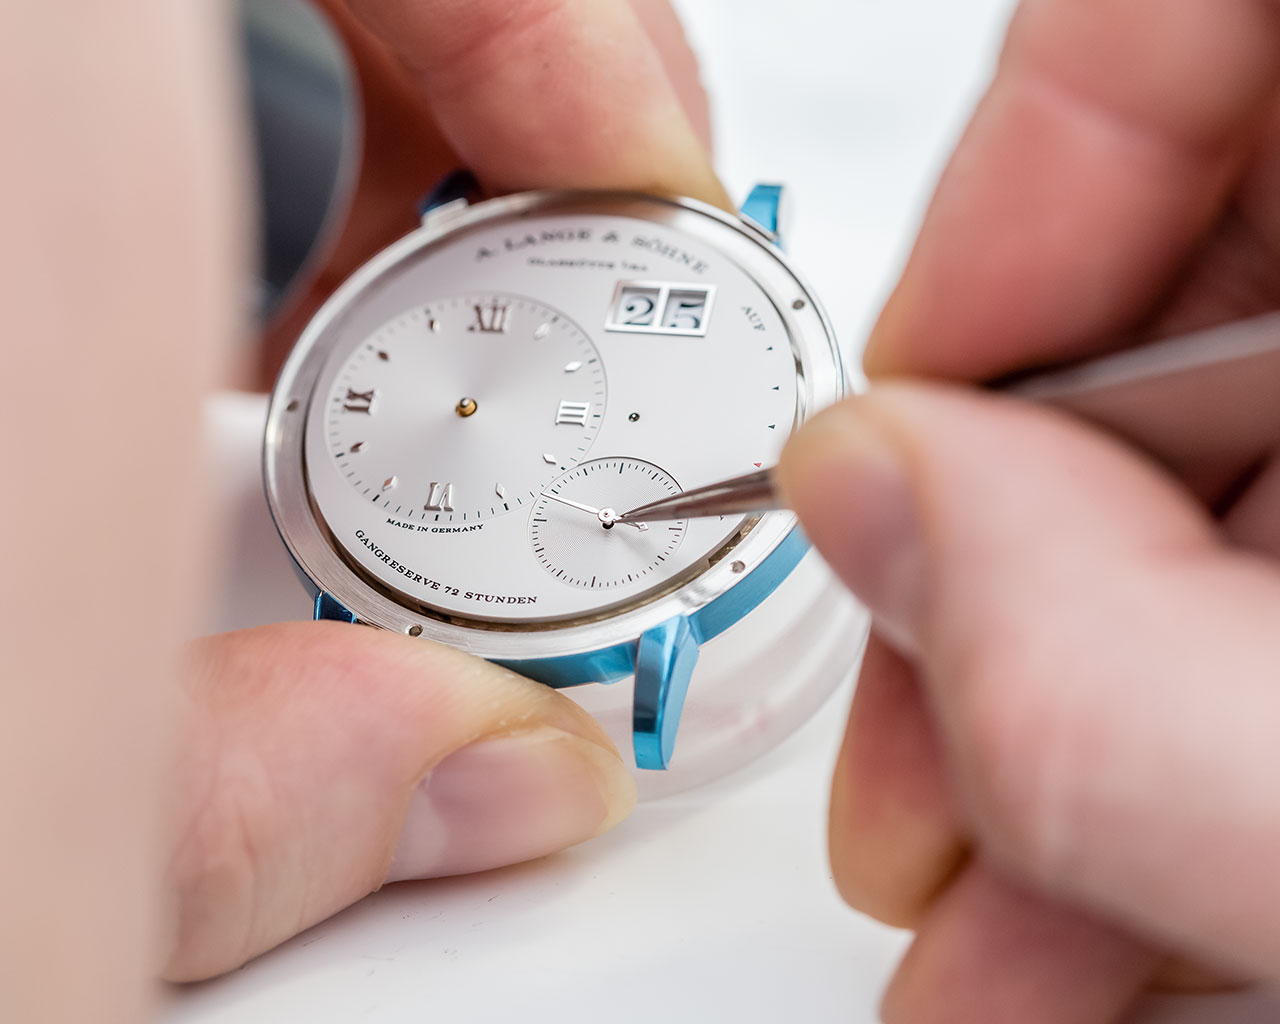 The hands are mounted and all the functions of the watch are checked. 